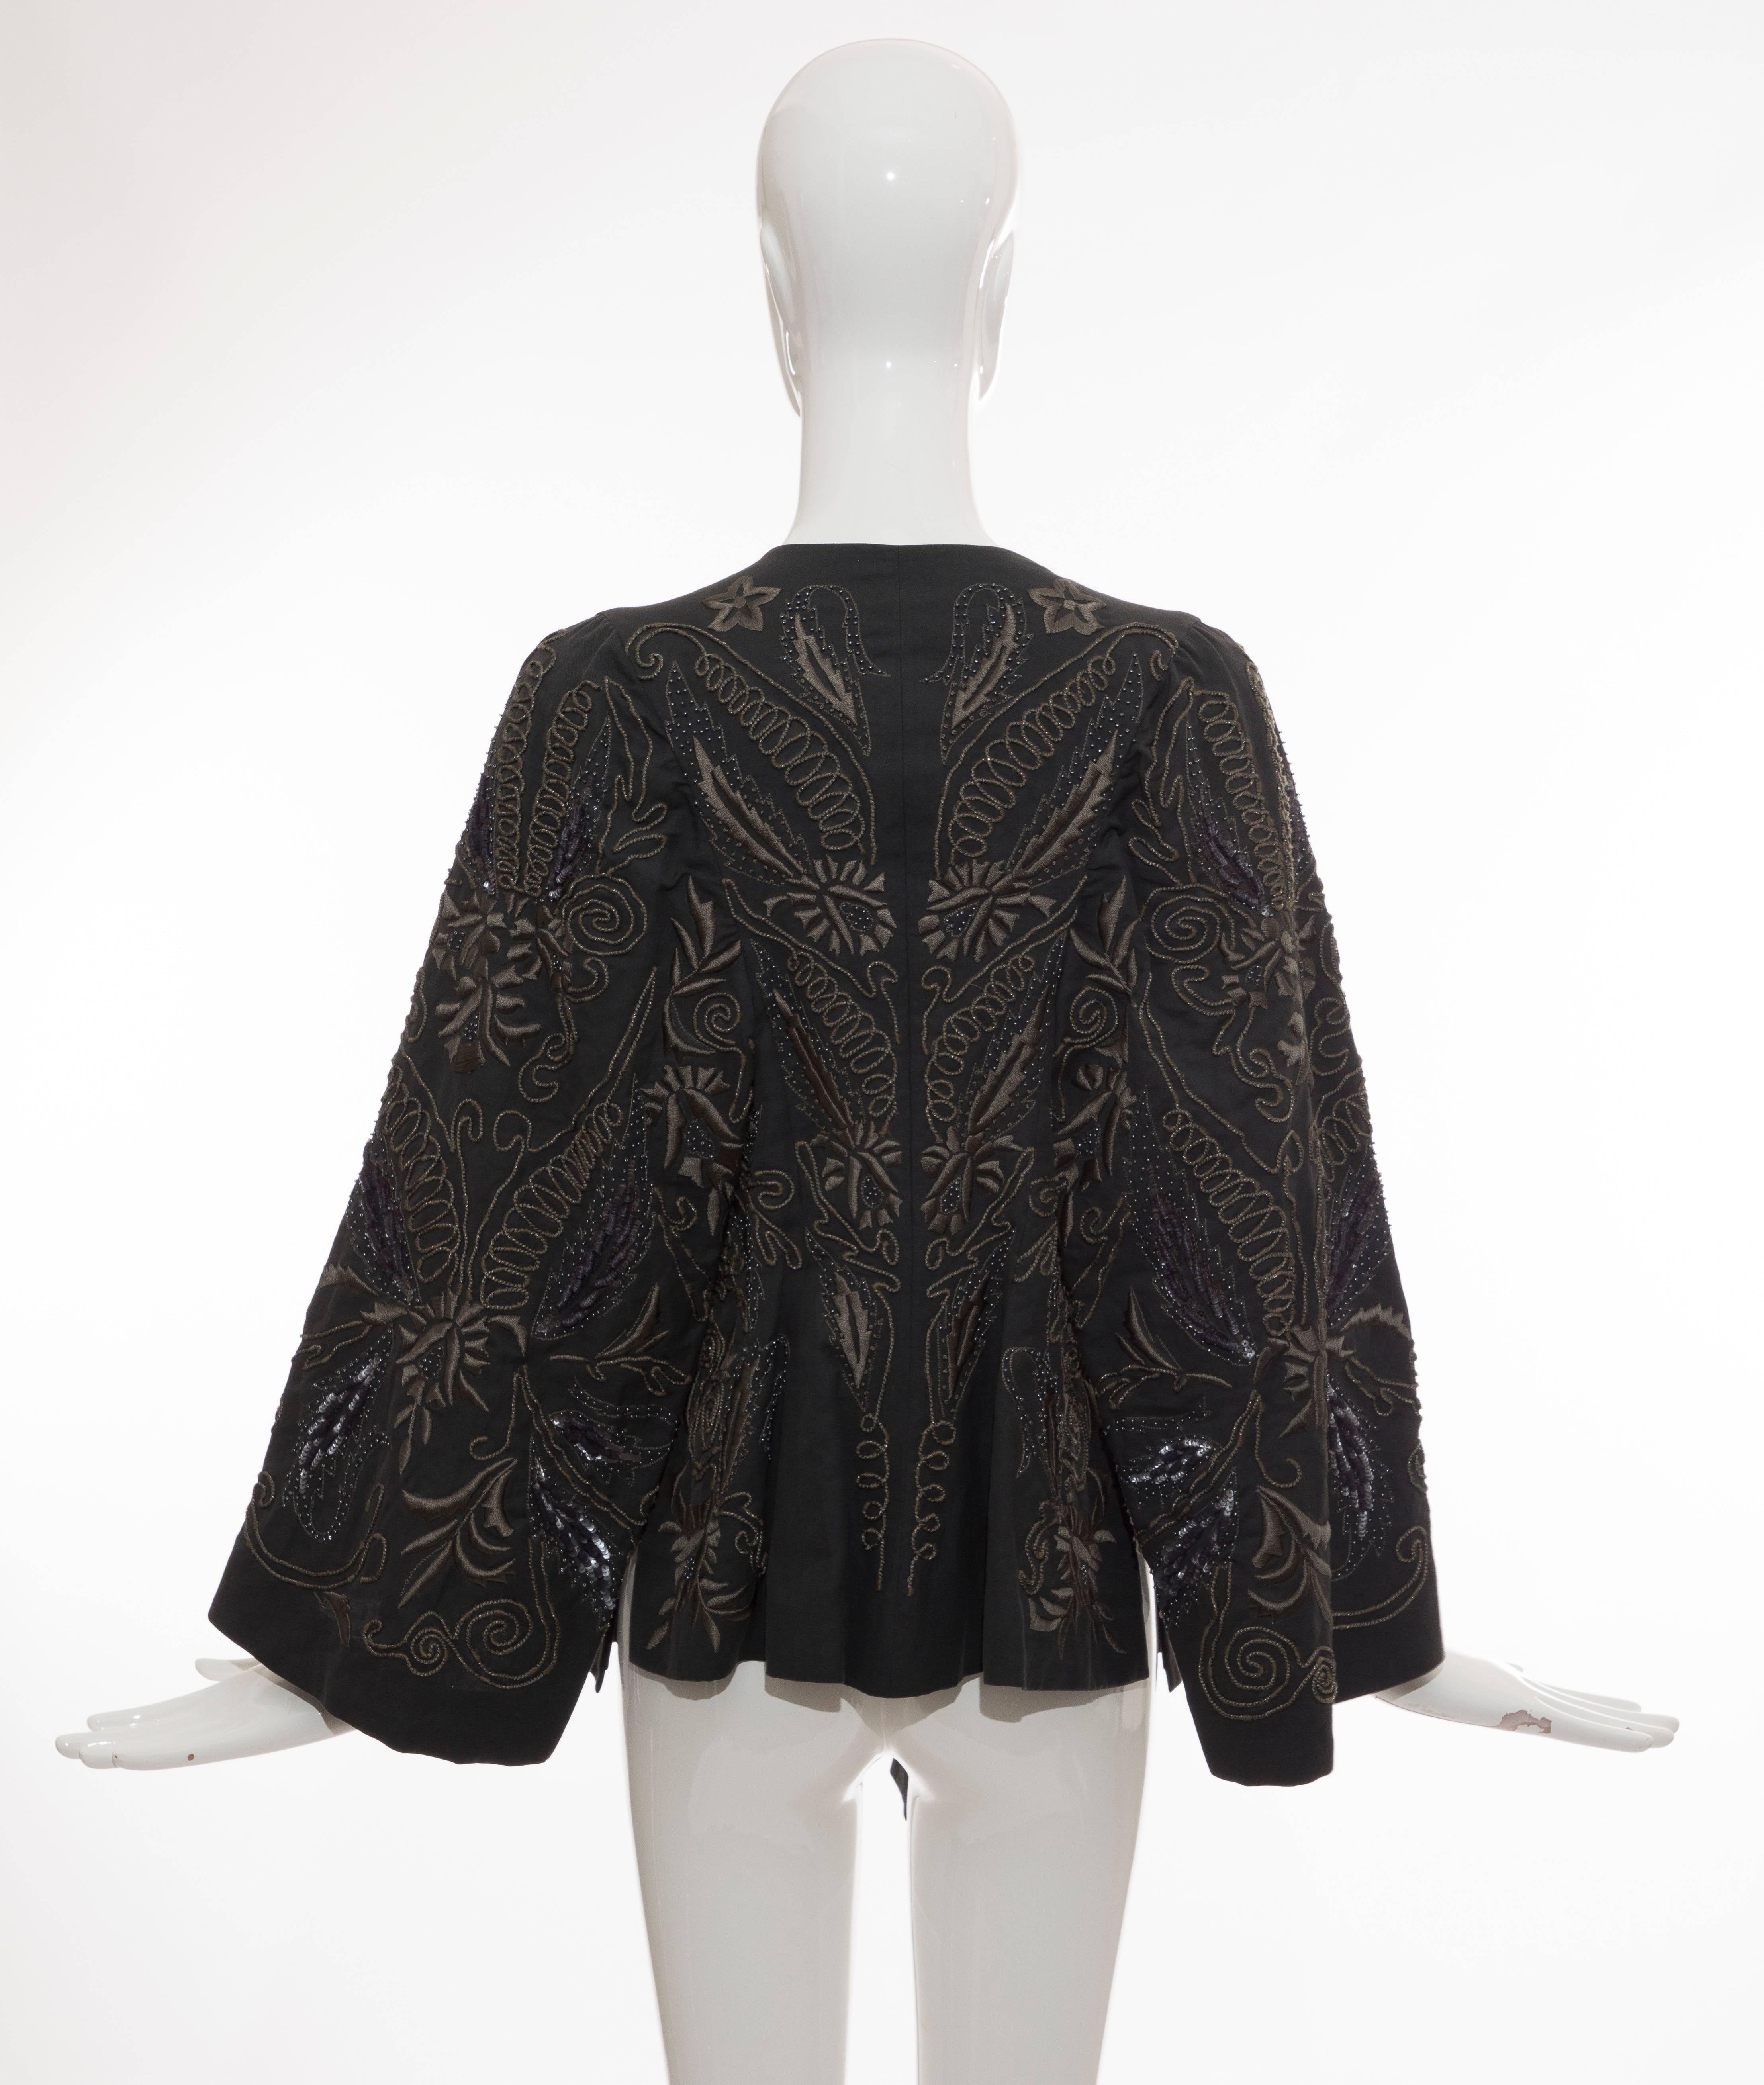 Dries Van Noten slate grey embroidered linen-blend jacket with embellished accent throughout, long sleeves and slash tie at waist.

FR. 36
US. 4

Bust: 30, Waist 32, Shoulder 12, Length 25, Sleeve 28

